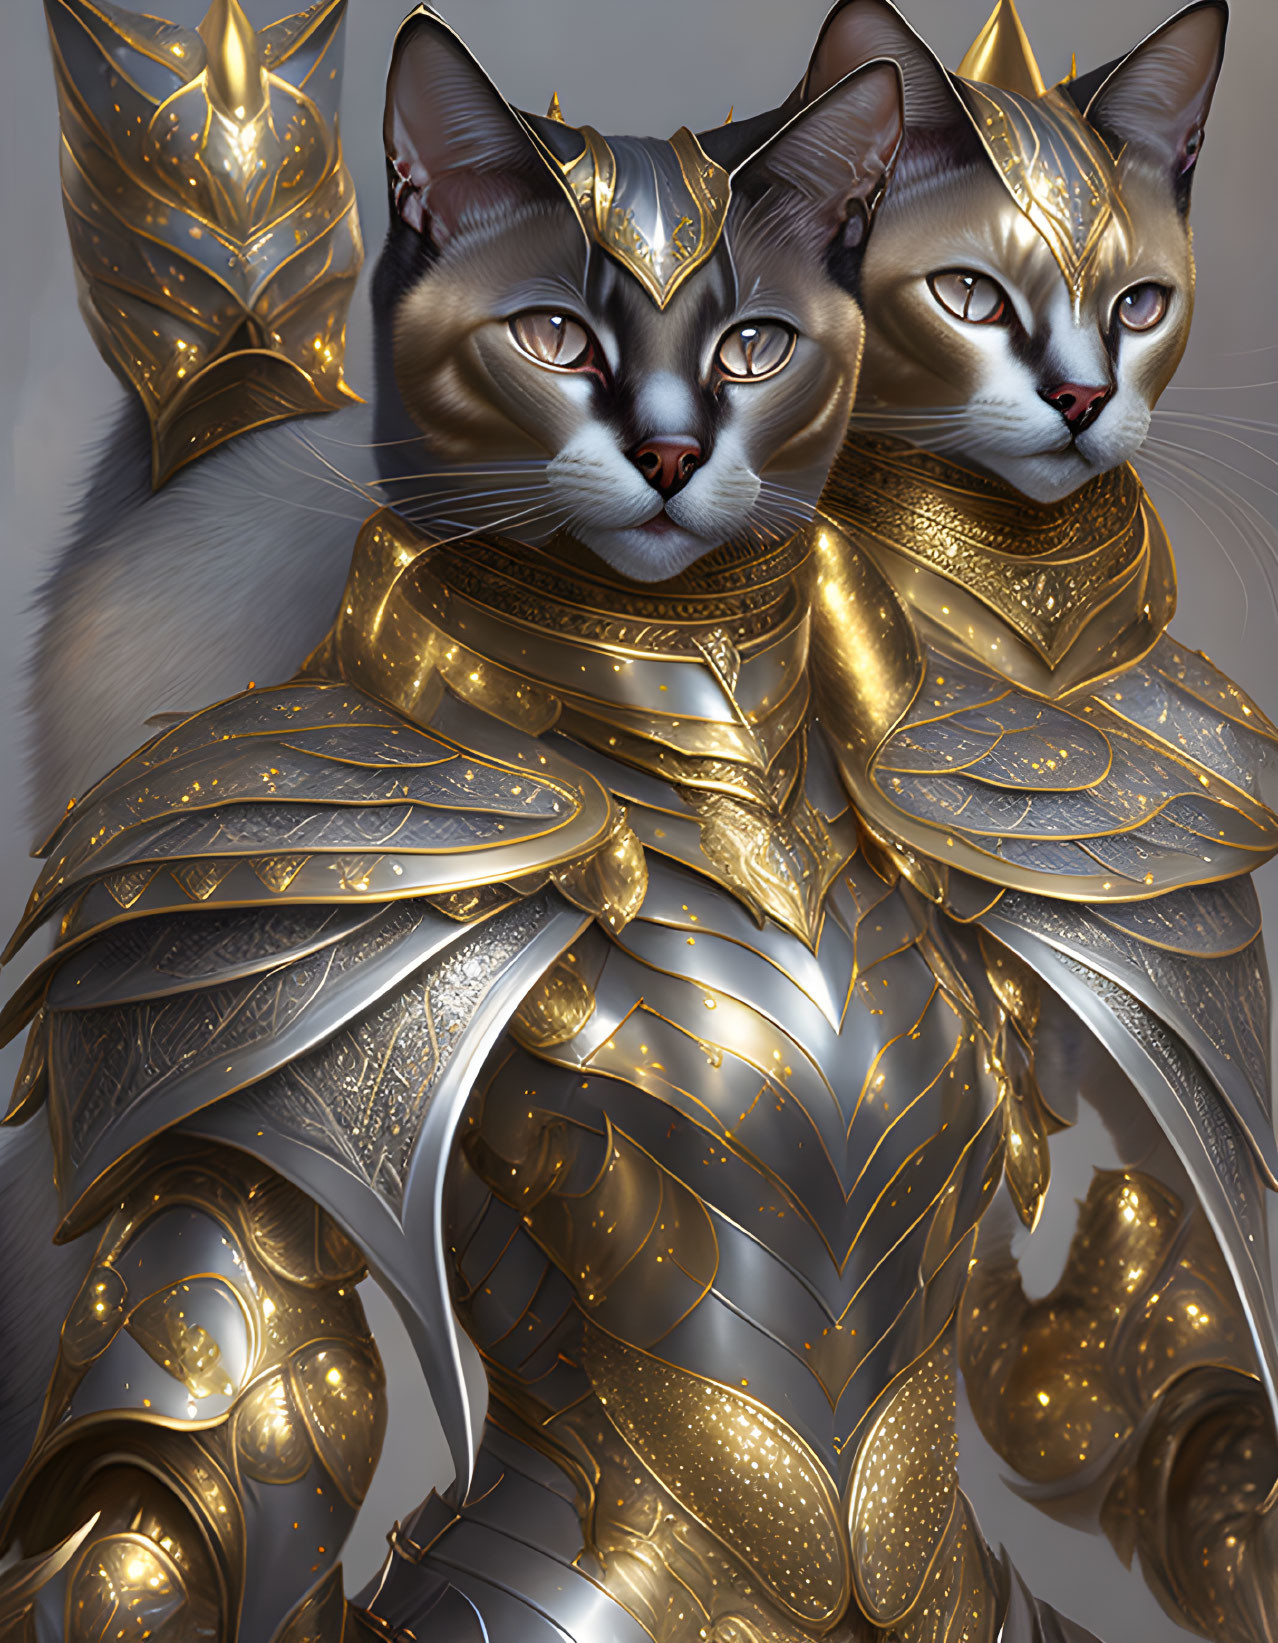 Regal cats in golden armor with intricate detailing